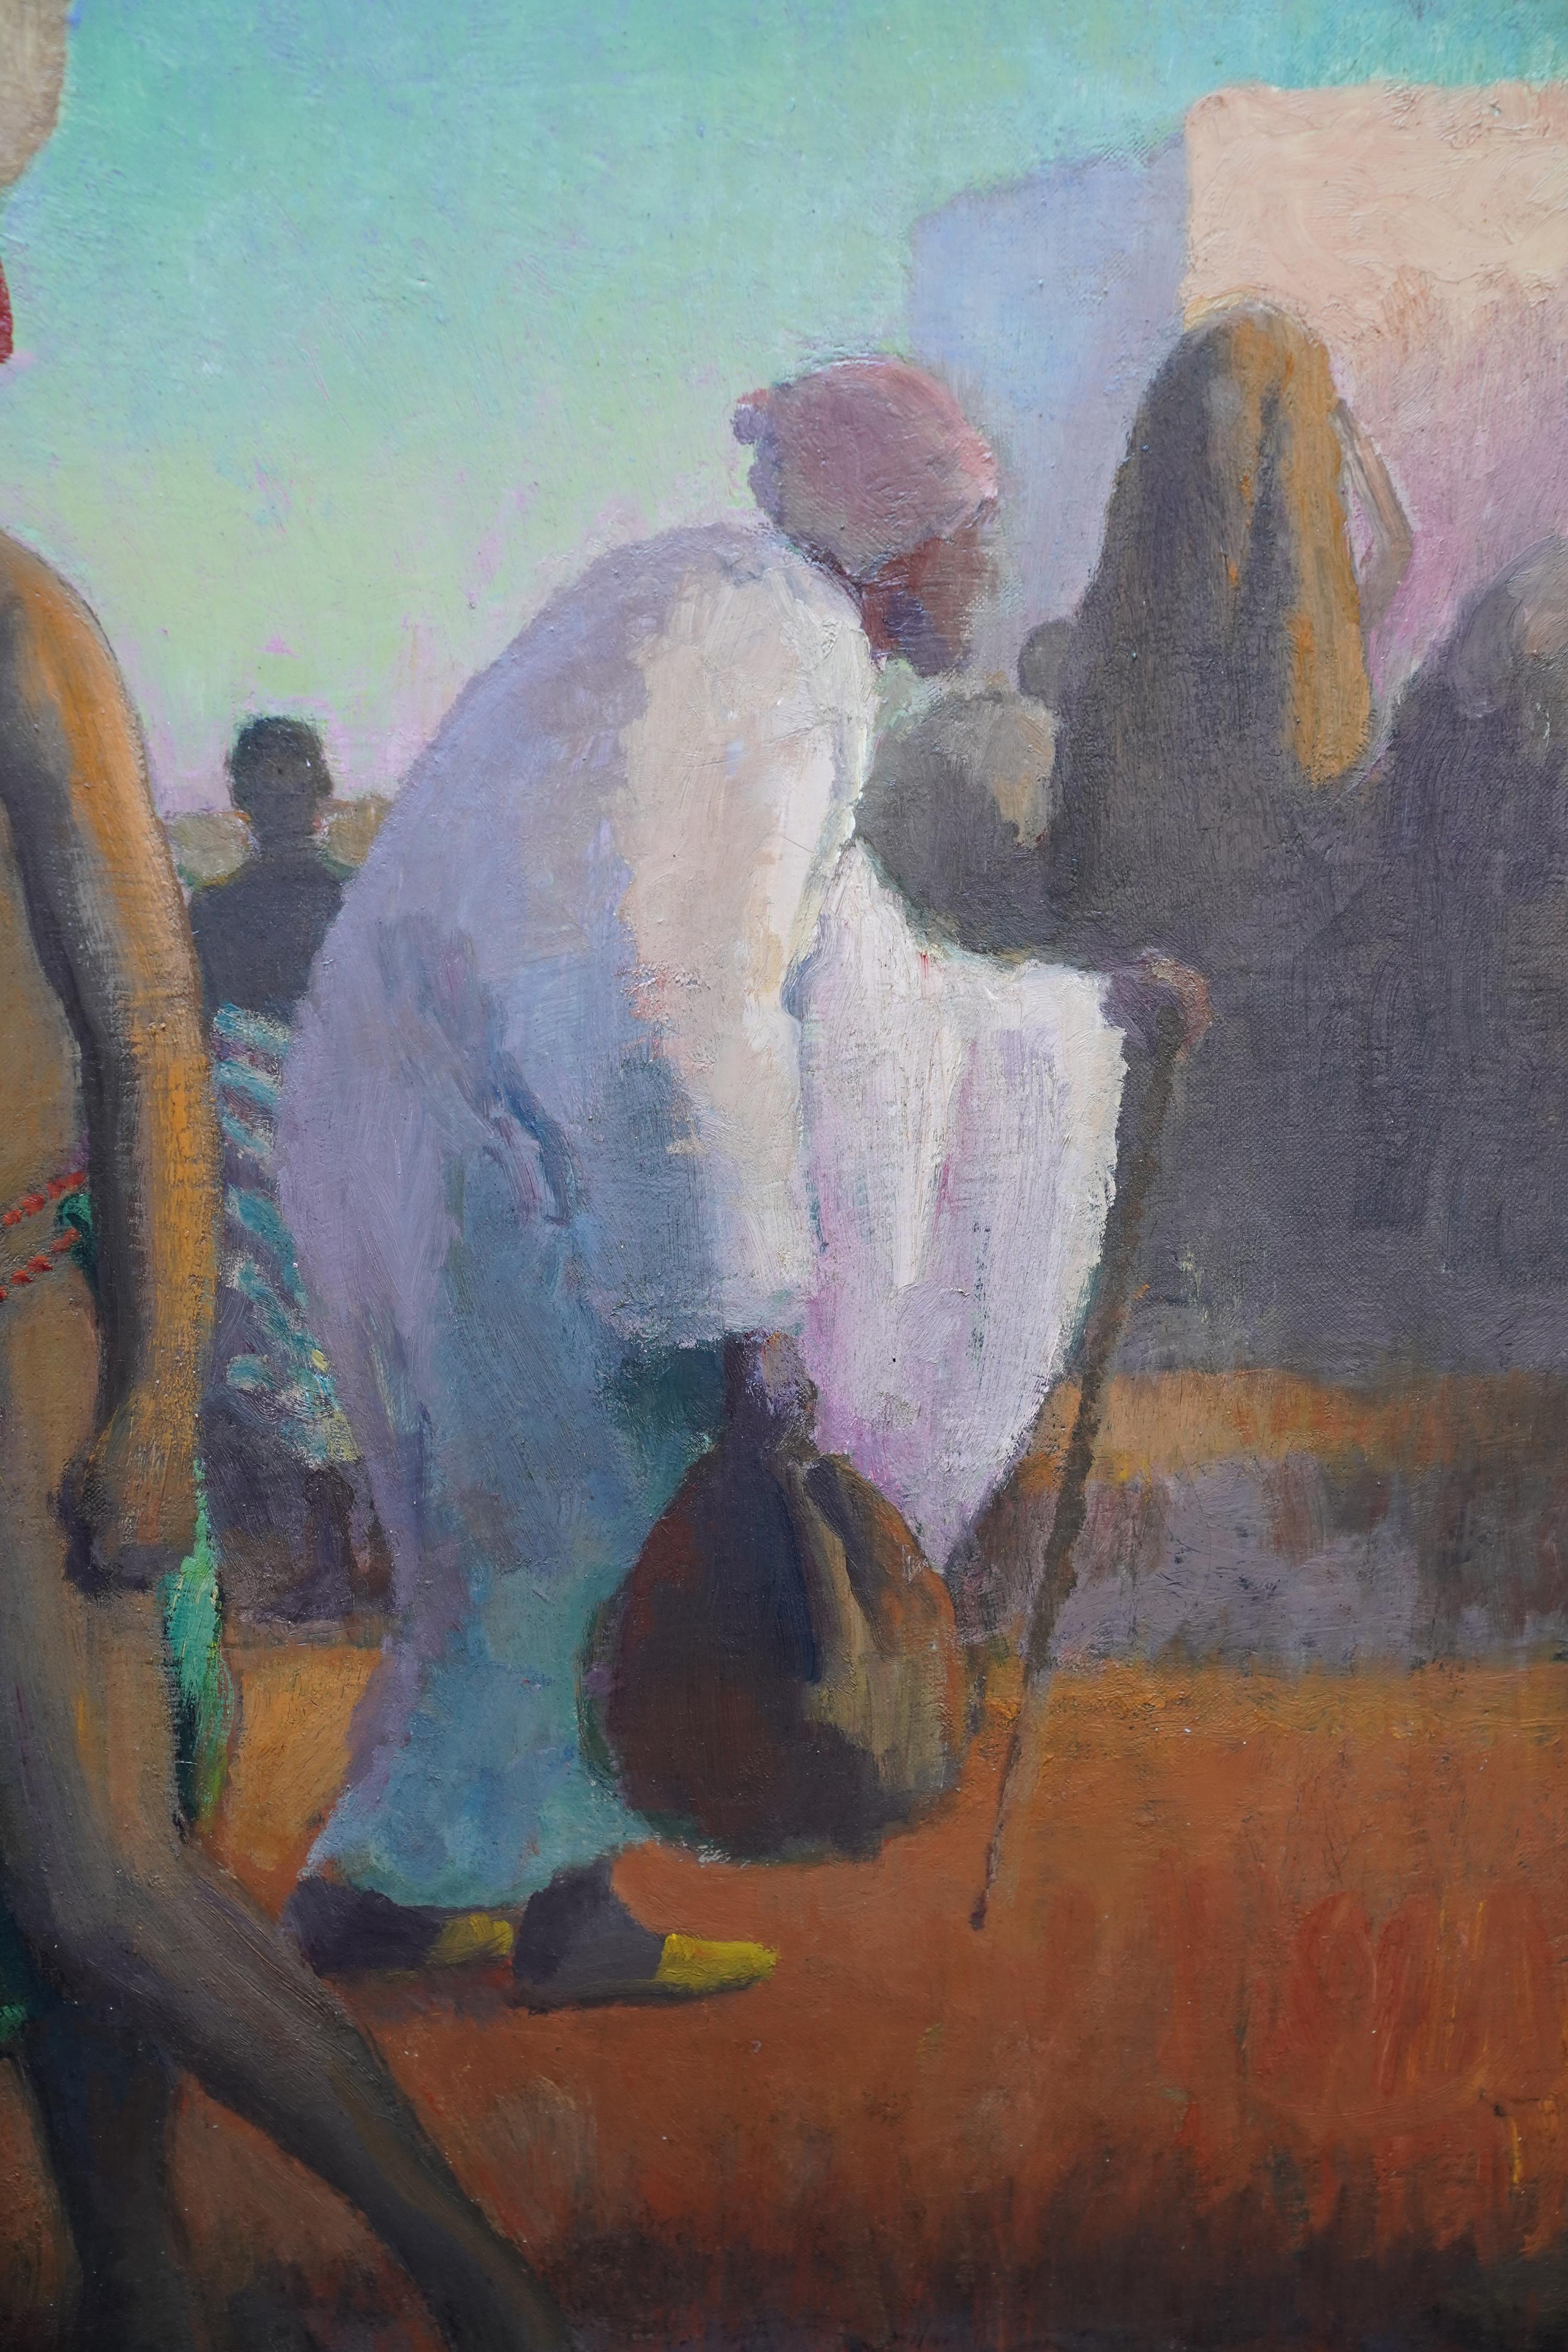 This superb vibrant Orientalist Post Impressionist oil painting is by noted British artist Gerald Spencer Pryse. It was painted about 1925 when Pryse was visiting Morocco and Northern Africa. The painting depicts three women carrying water in